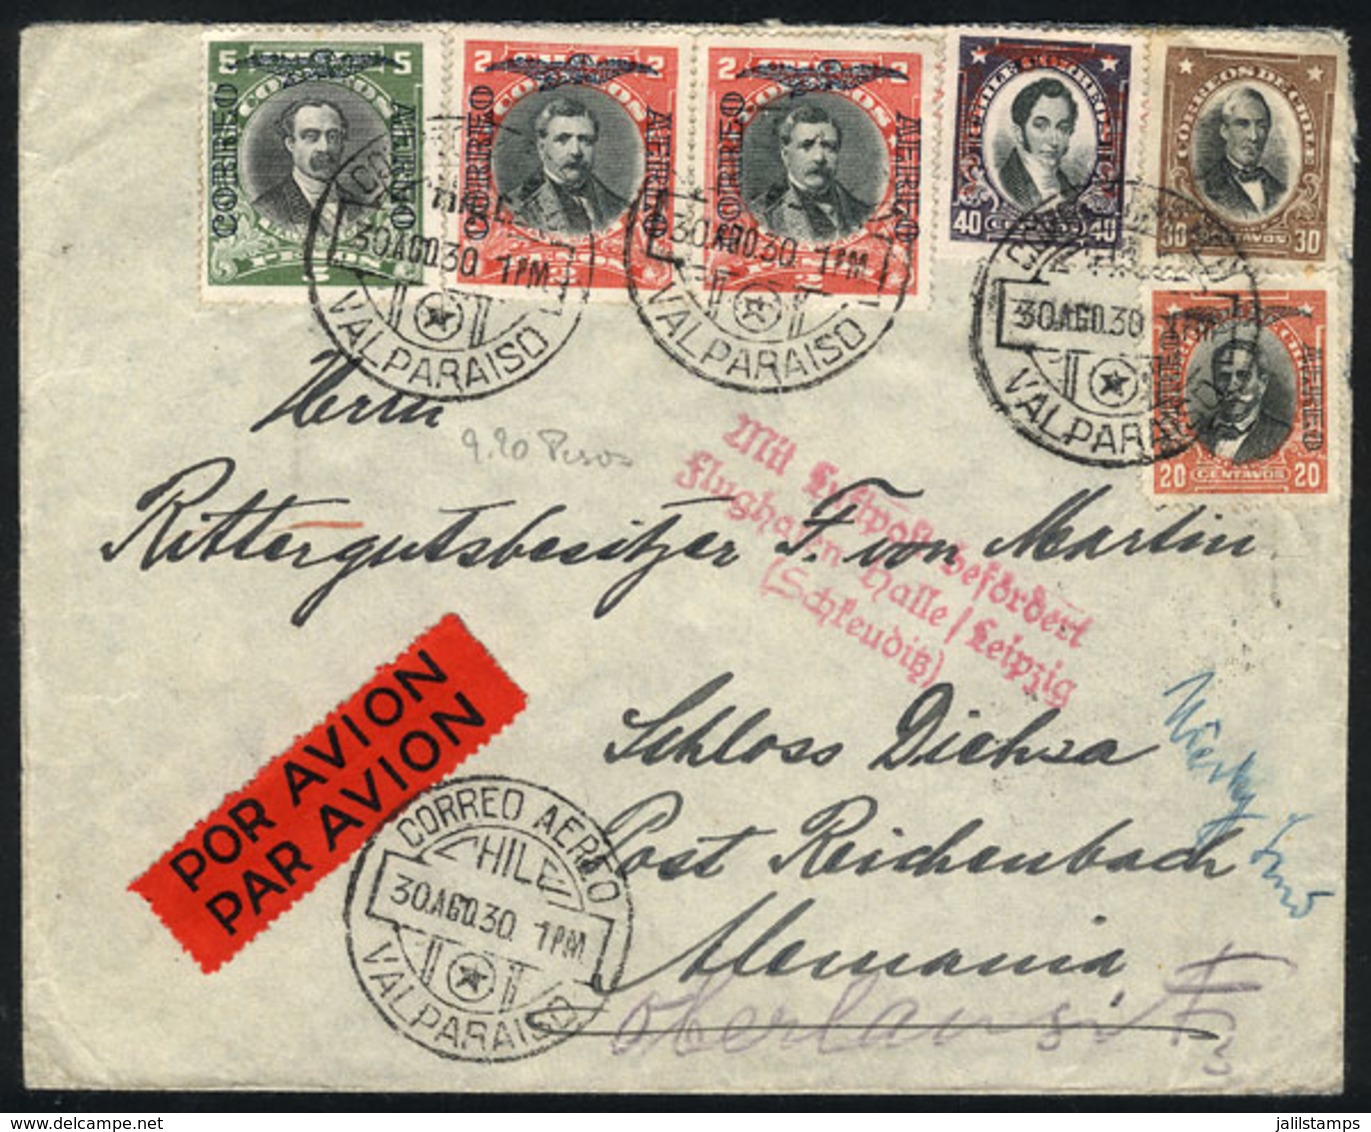 1064 CHILE: Airmail Cover Sent From Valparaiso To Germany On 30/AU/1930 With Good Postage Of 9.90P., VF Quality! - Chile